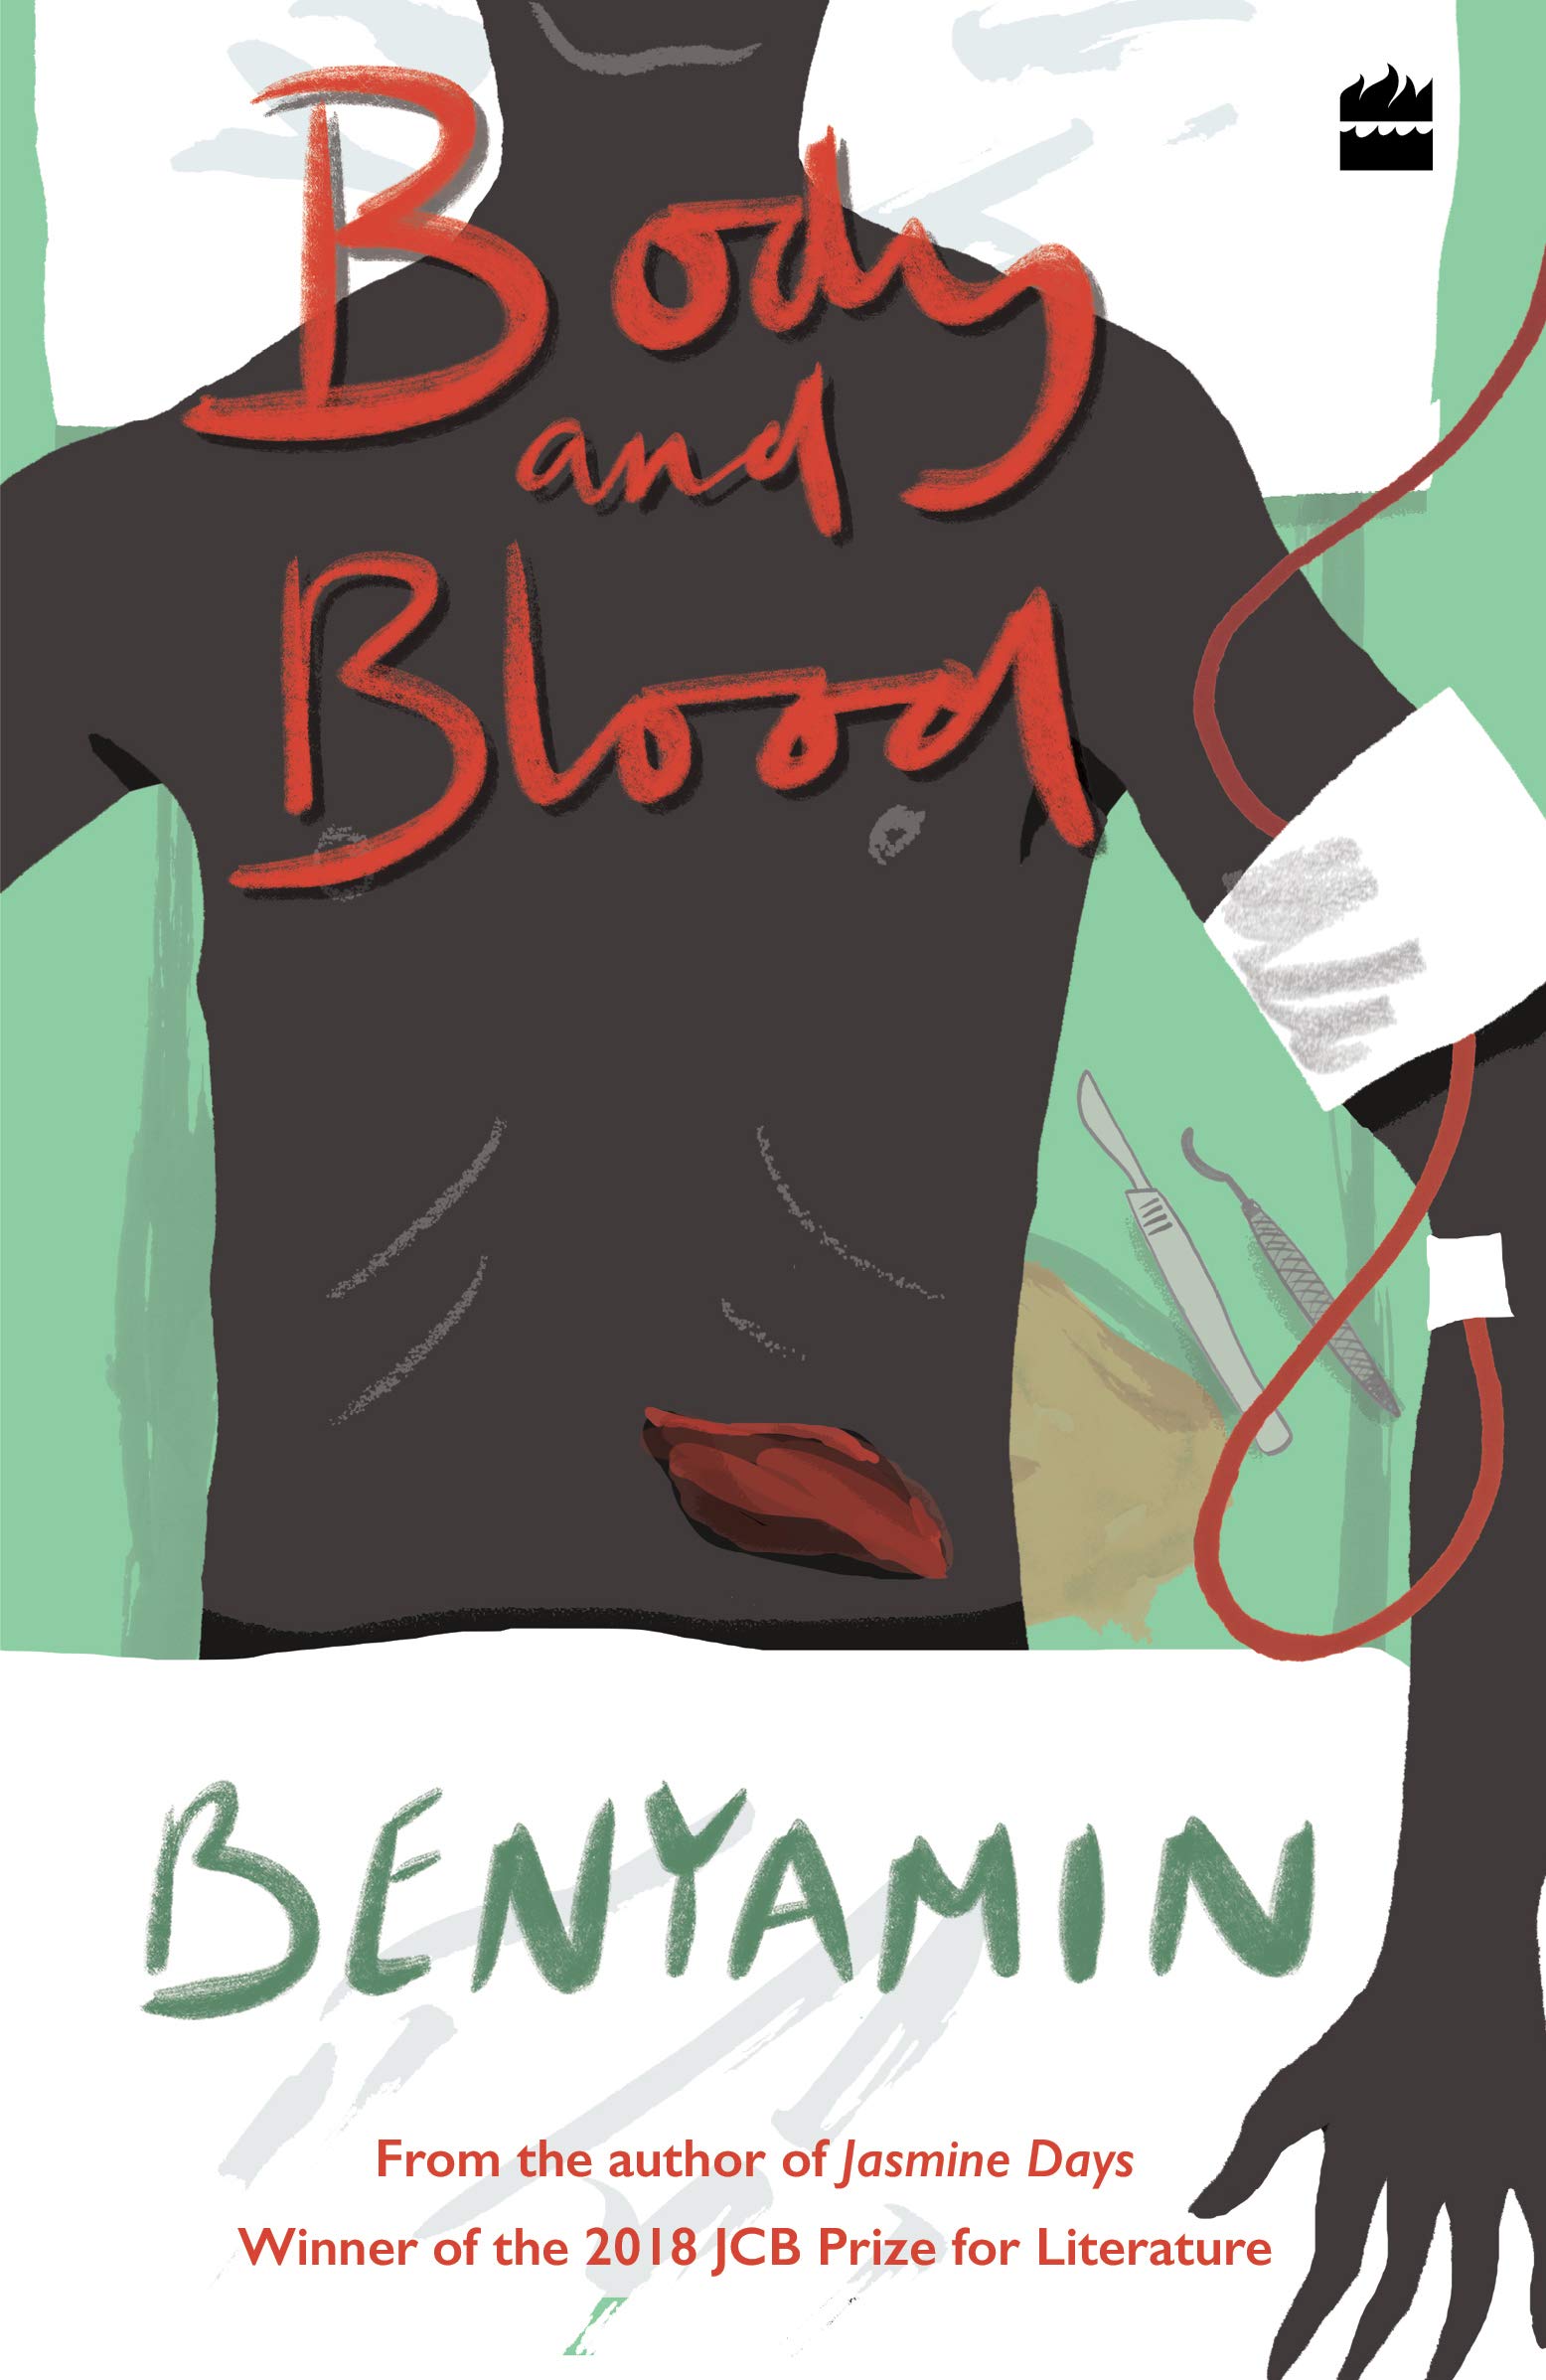 Book Excerpt | Body and Blood: Benyamin's thrilling novel tells the story of Organ Trafficking and Spiritual Trading